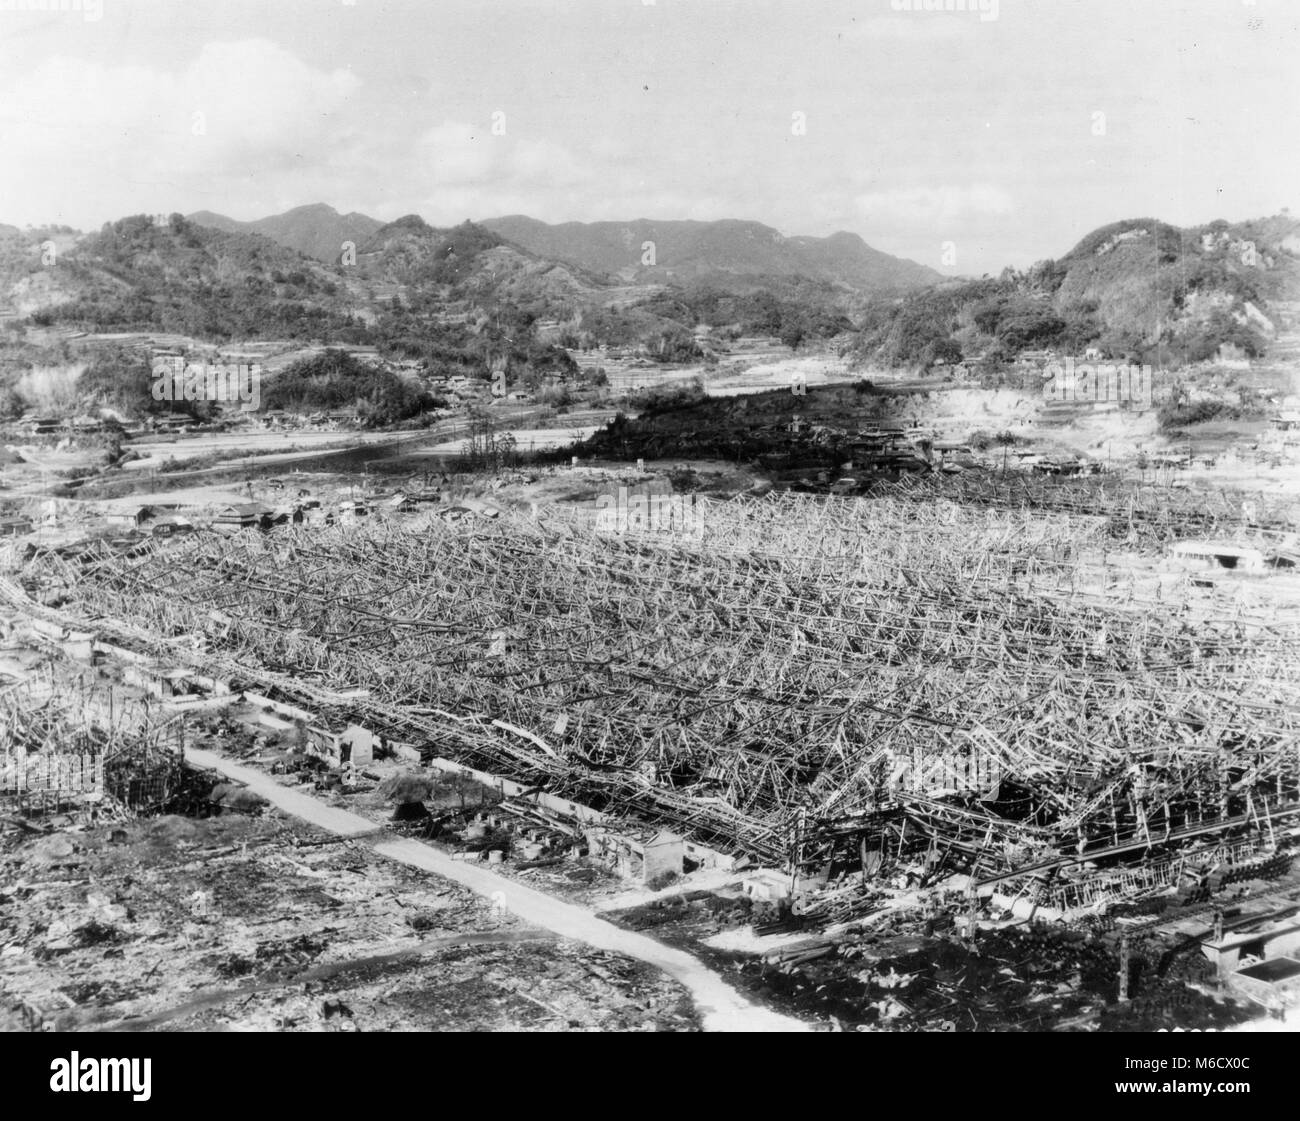 View of the stripped roof and distorted steel frame of the Mitsubishi Torpedo Works, located 4500 feet from ground zero at Nagasaki. Note intact buildings in the background, shielded by uneven terrain. Nagasaki, Japan, 1945. U.S. Air Force Stock Photo